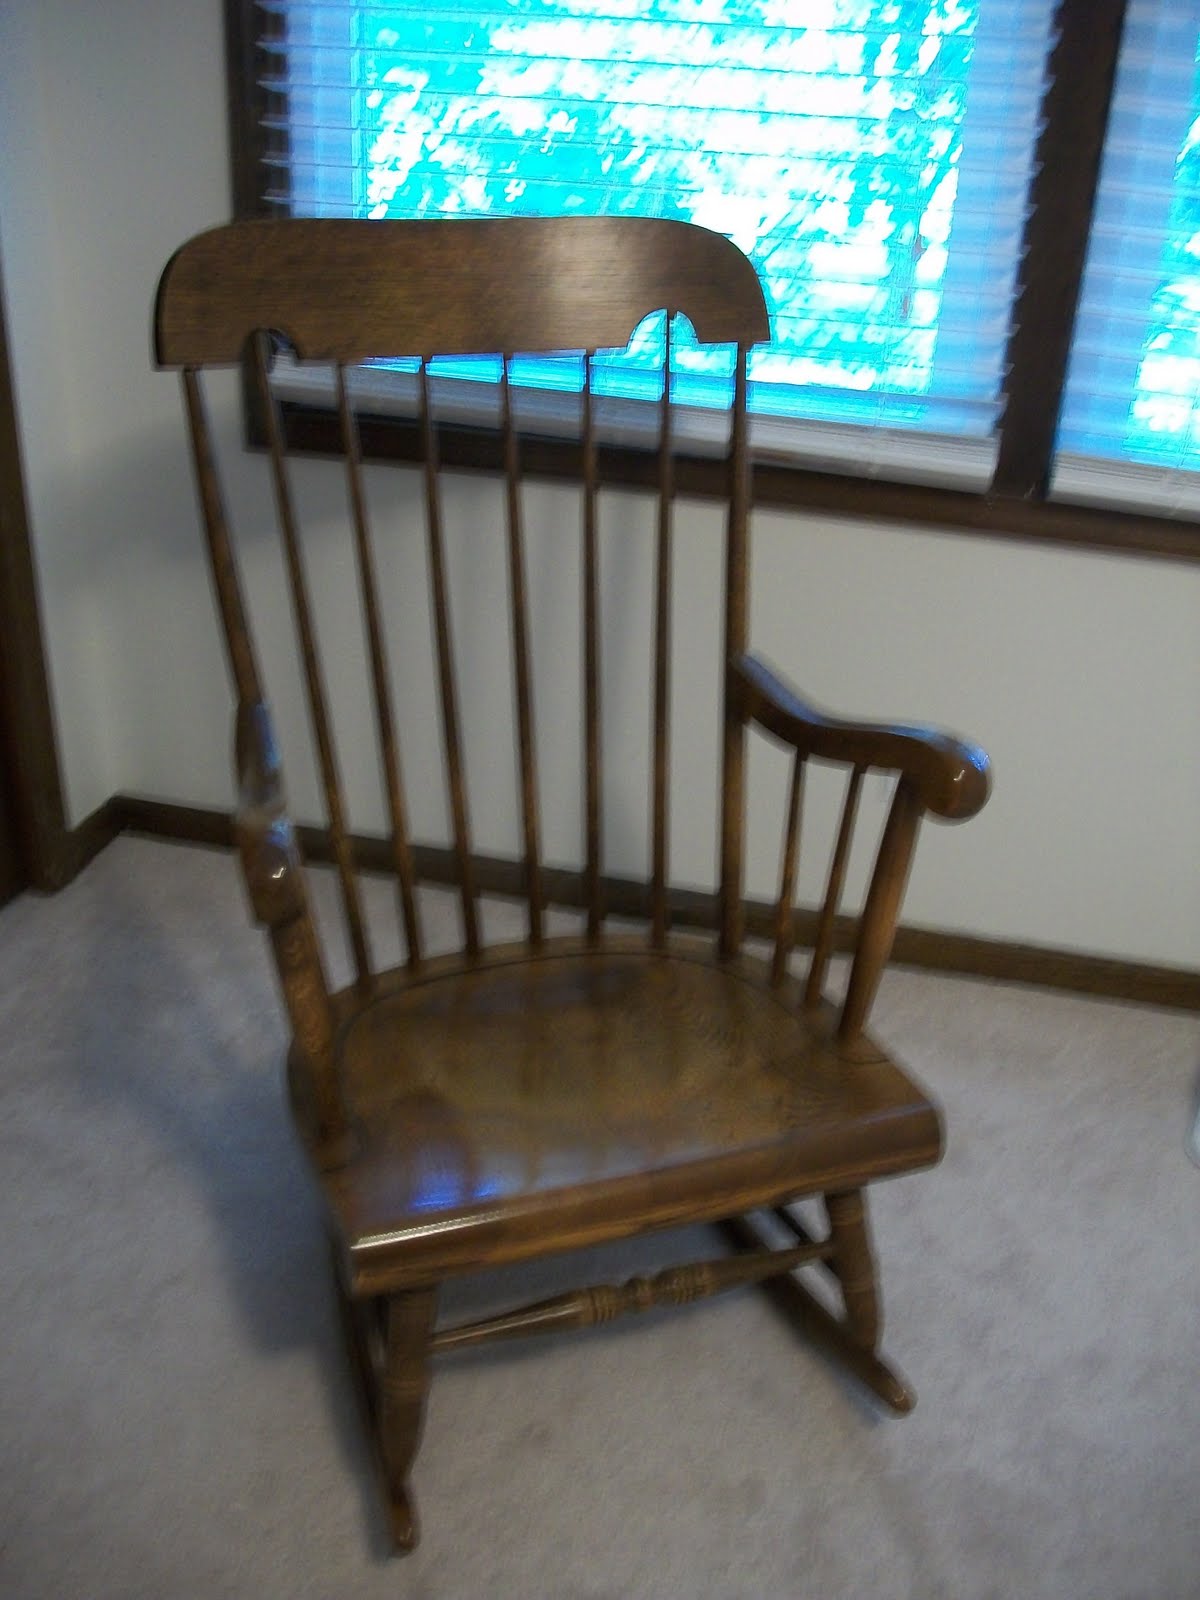 Church Chairs For Sale On Craigslist Woodworking Bench Pdf